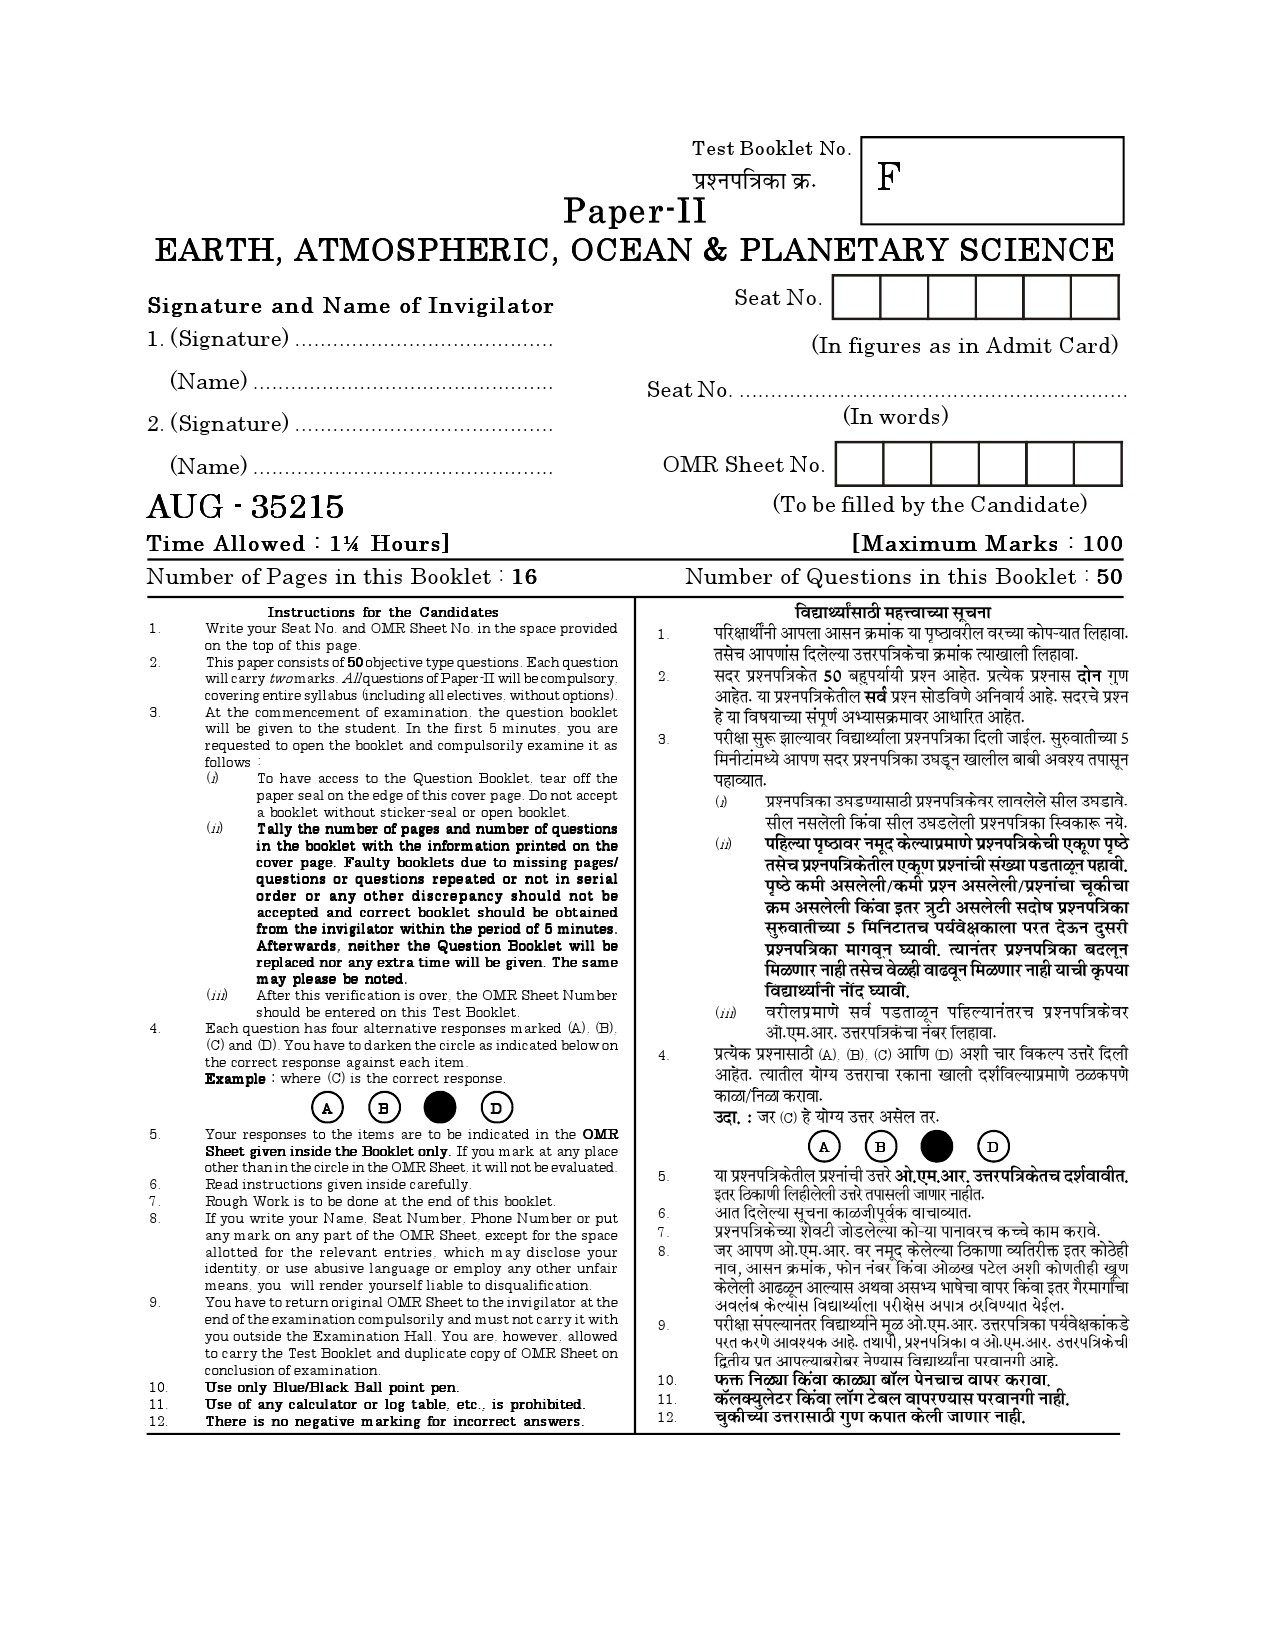 Maharashtra SET Earth Atmospheric Ocean Planetary Science Question Paper II August 2015 1